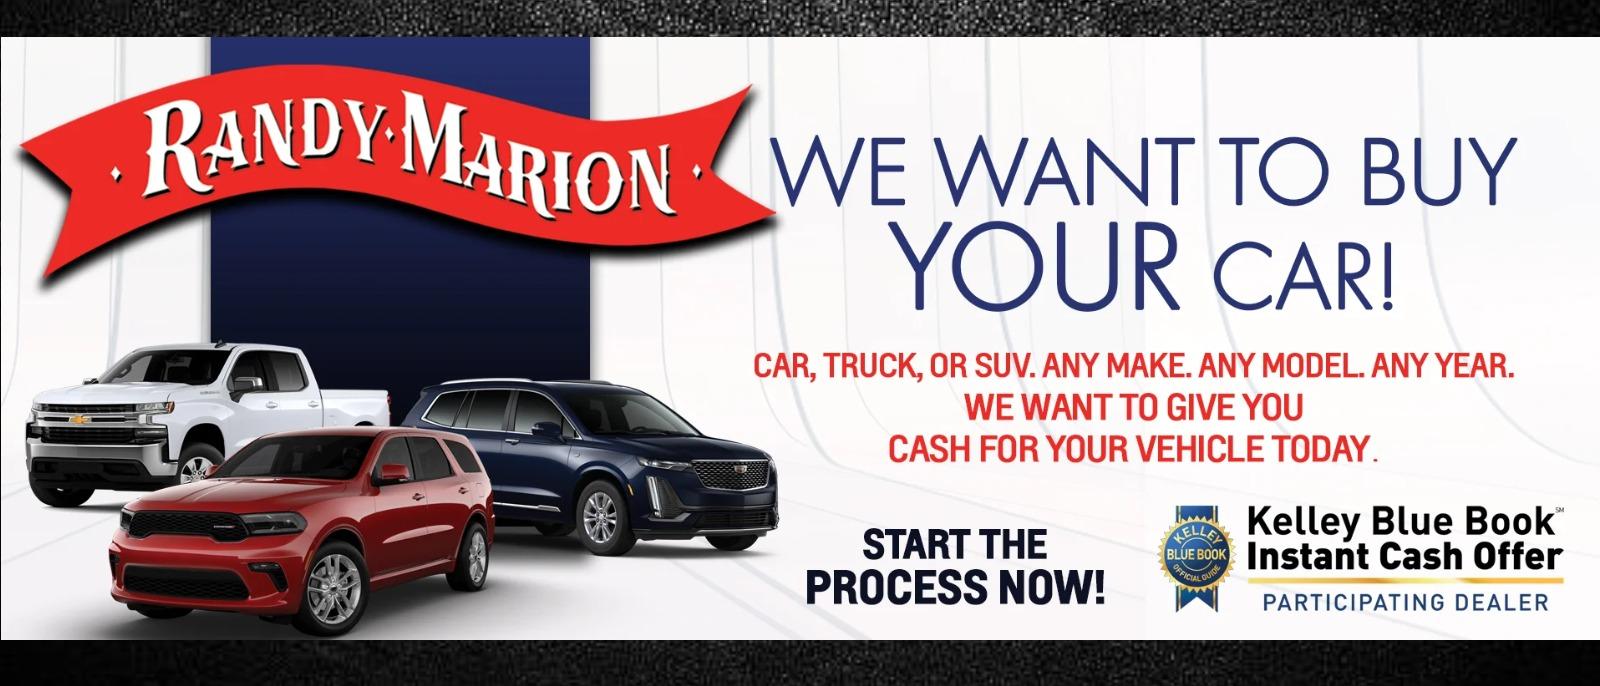 Randy Marion will buy your car!